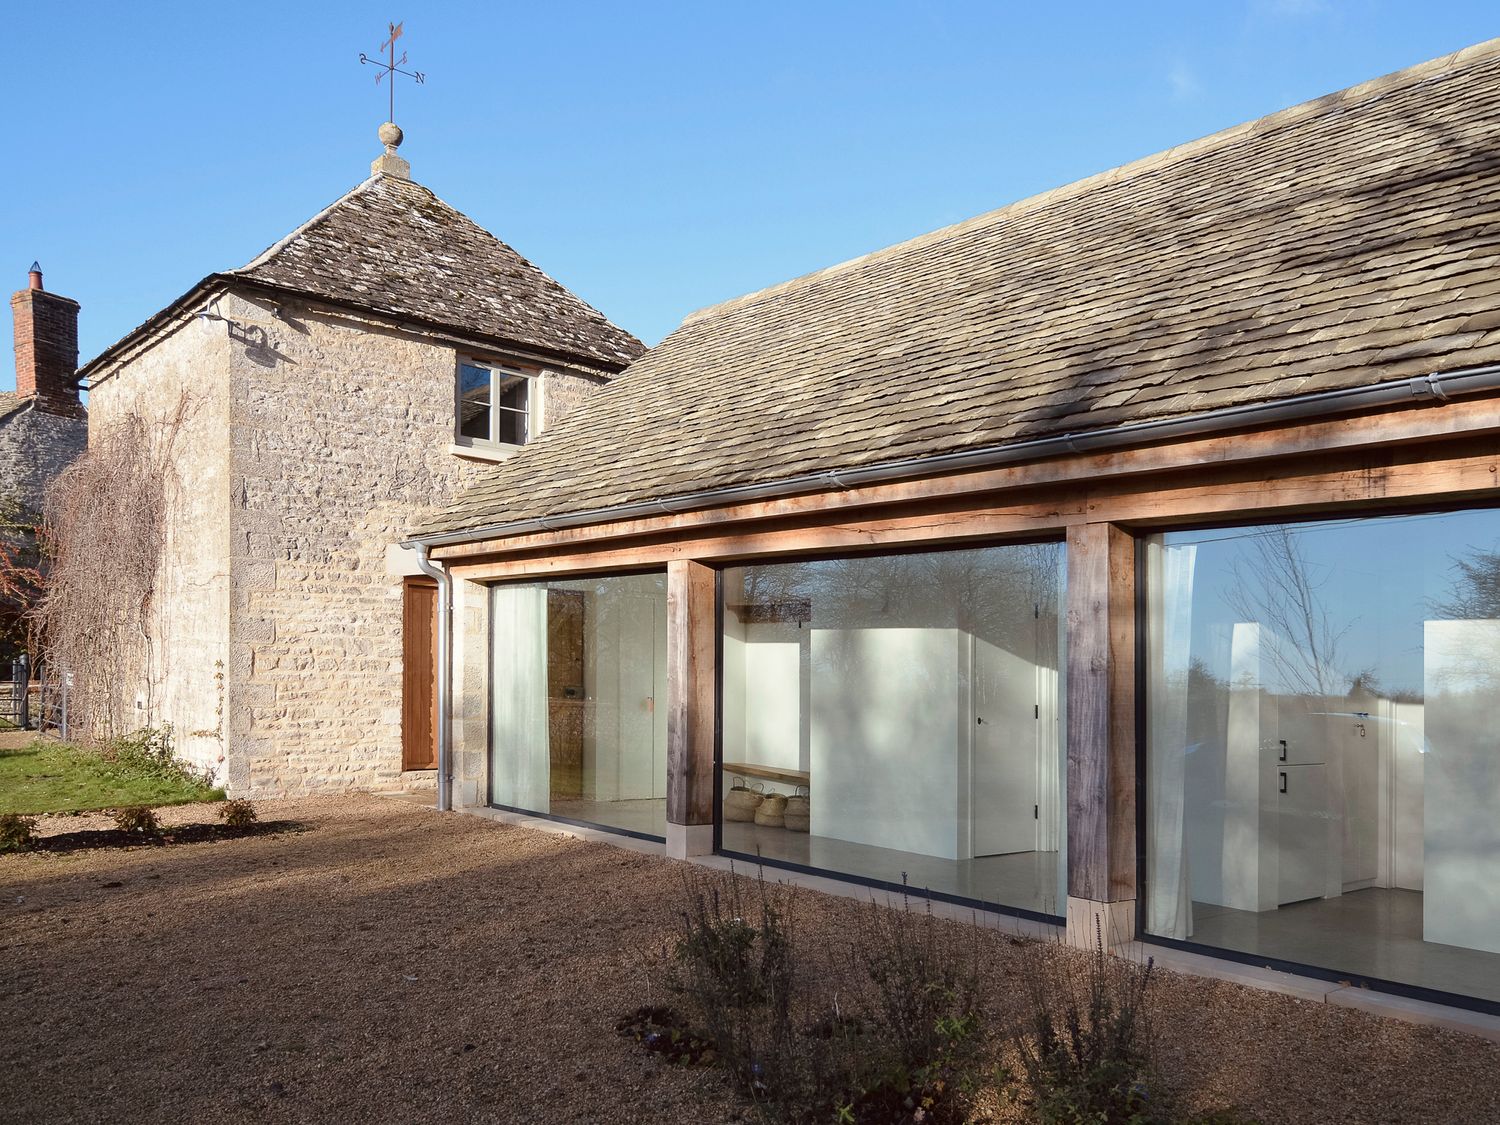 High Cogges Farm Holiday Cottages – The Cart Shed - Cotswolds - 1051267 - photo 1